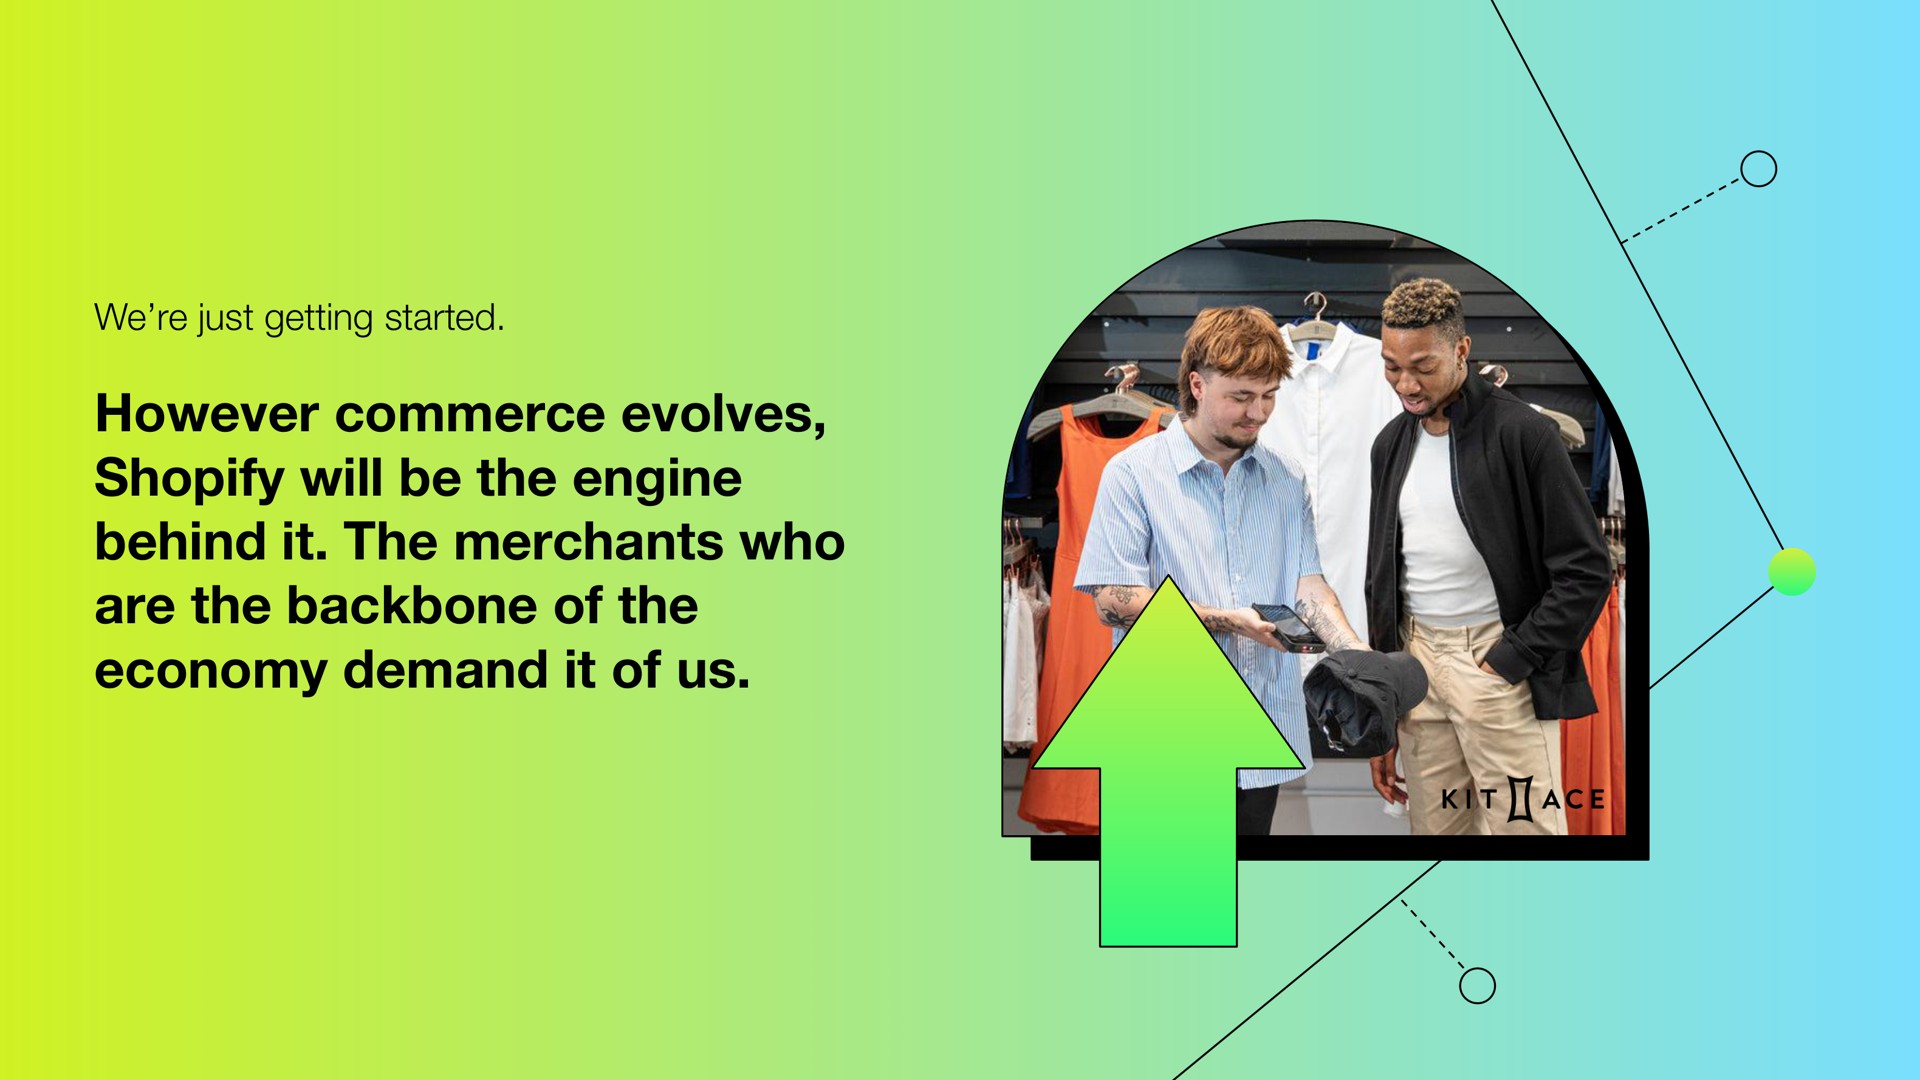 we just getting started however commerce evolves will be the engine behind it the merchants who are the backbone of the economy demand it of us | Shopify